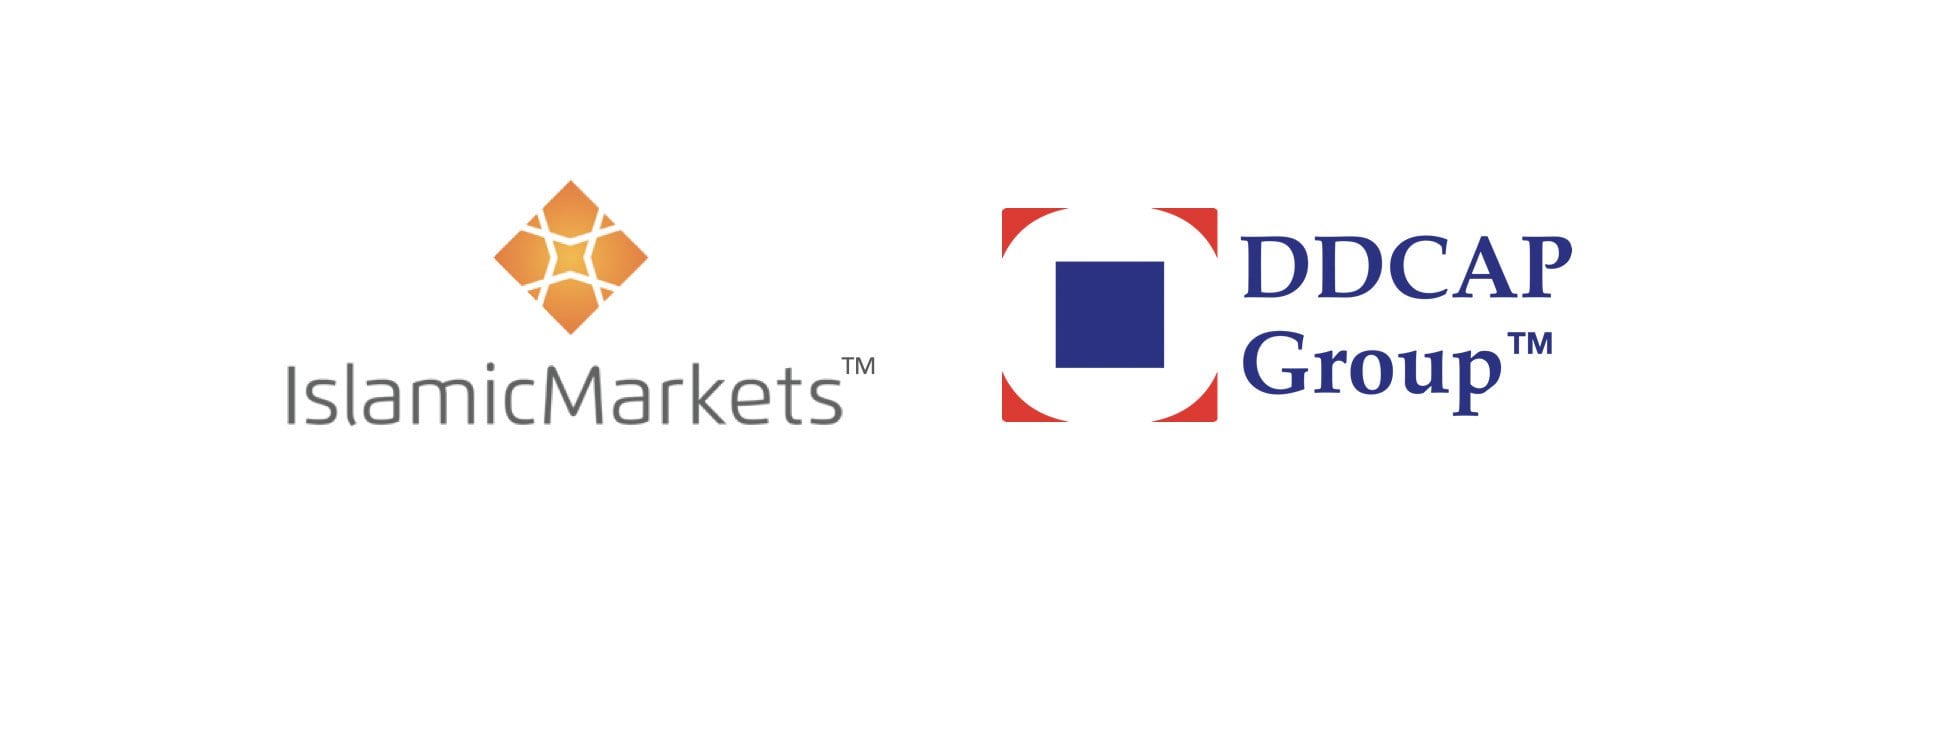 Read more about the article DDCAP Group™ are delighted to announce our investment in IslamicMarkets.com.